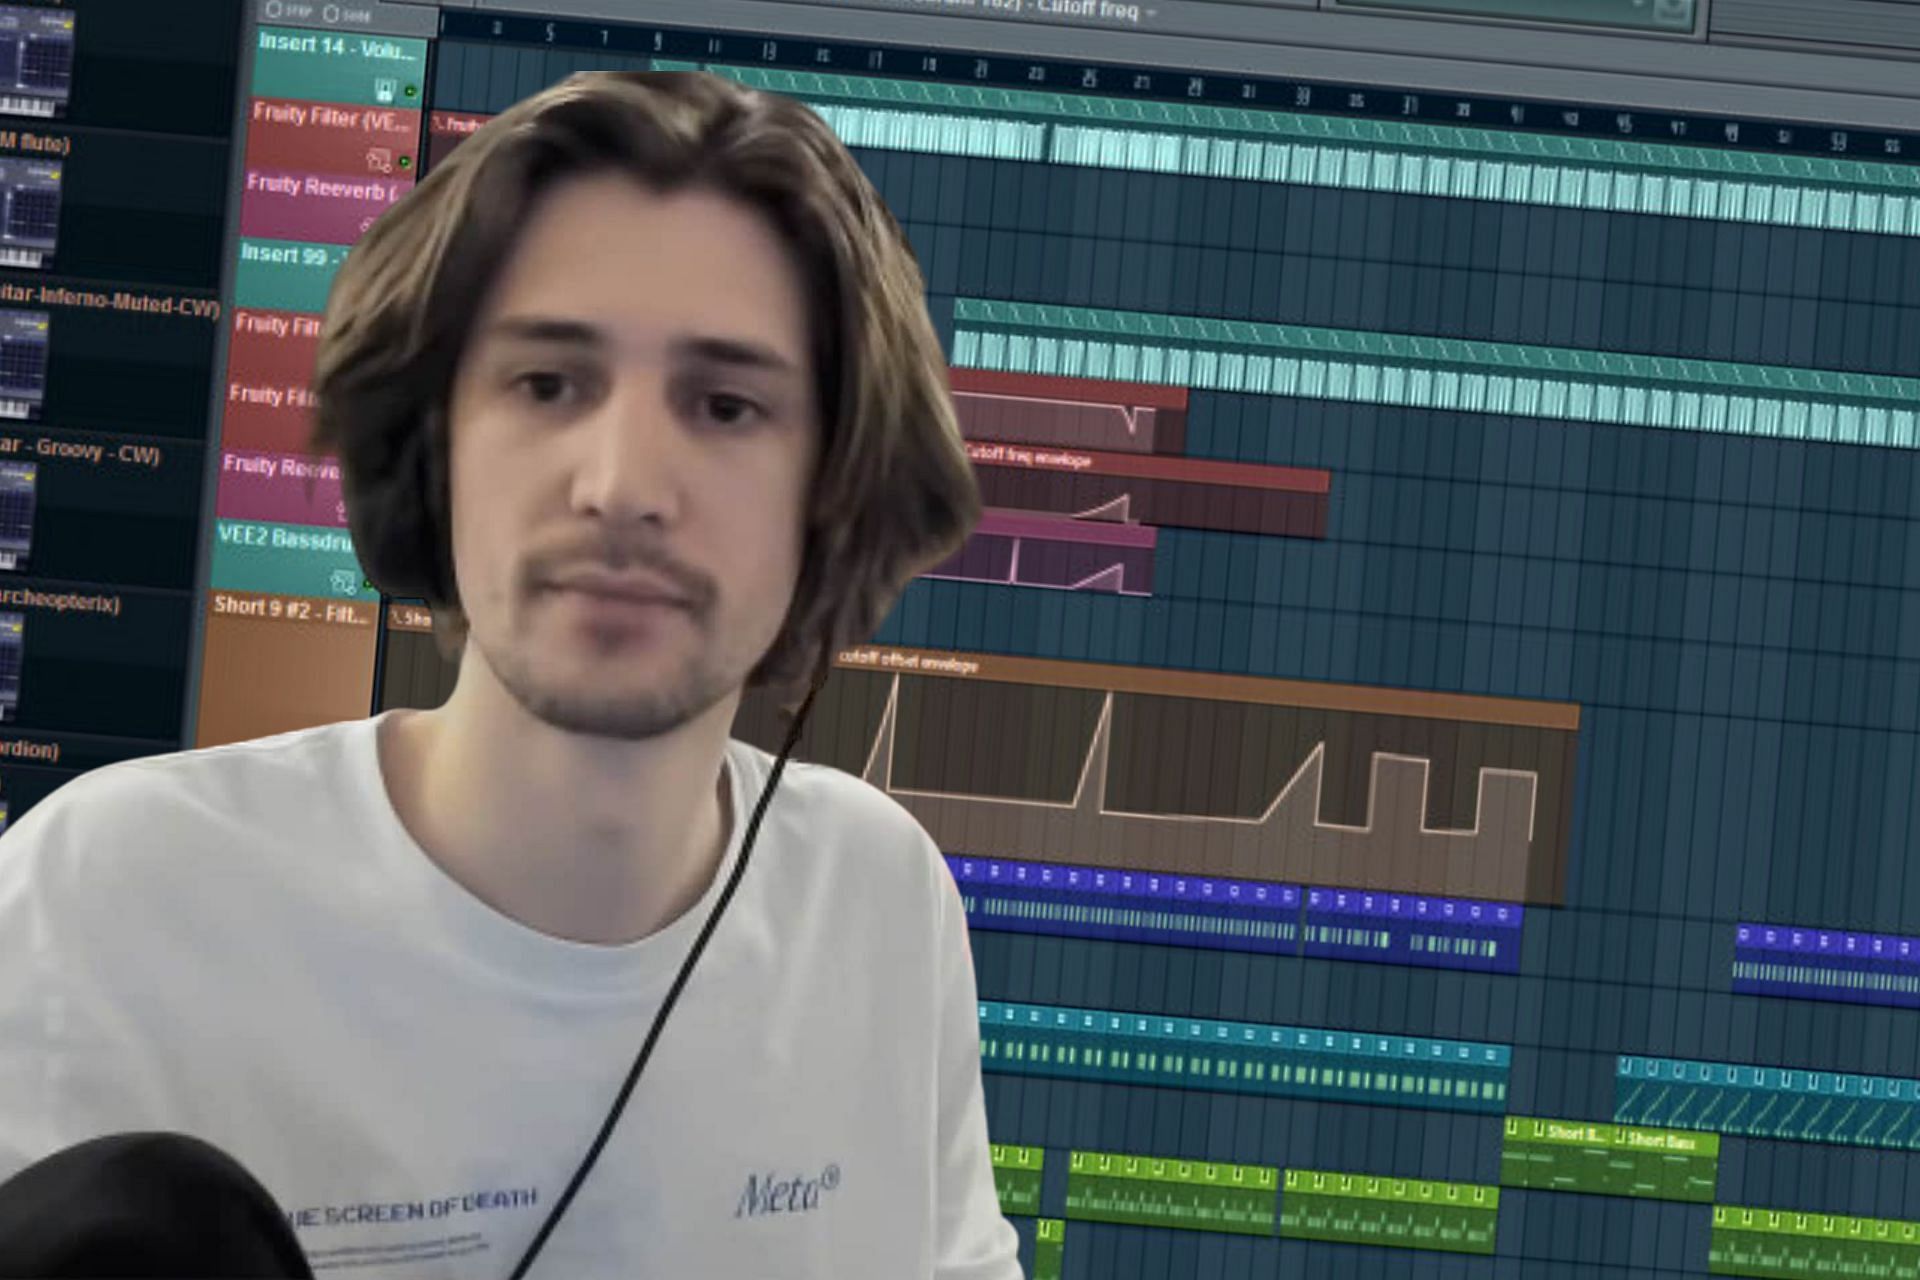 xQc has started to learn how to produce electronic music on FL Studio (Image via Sportskeeda)